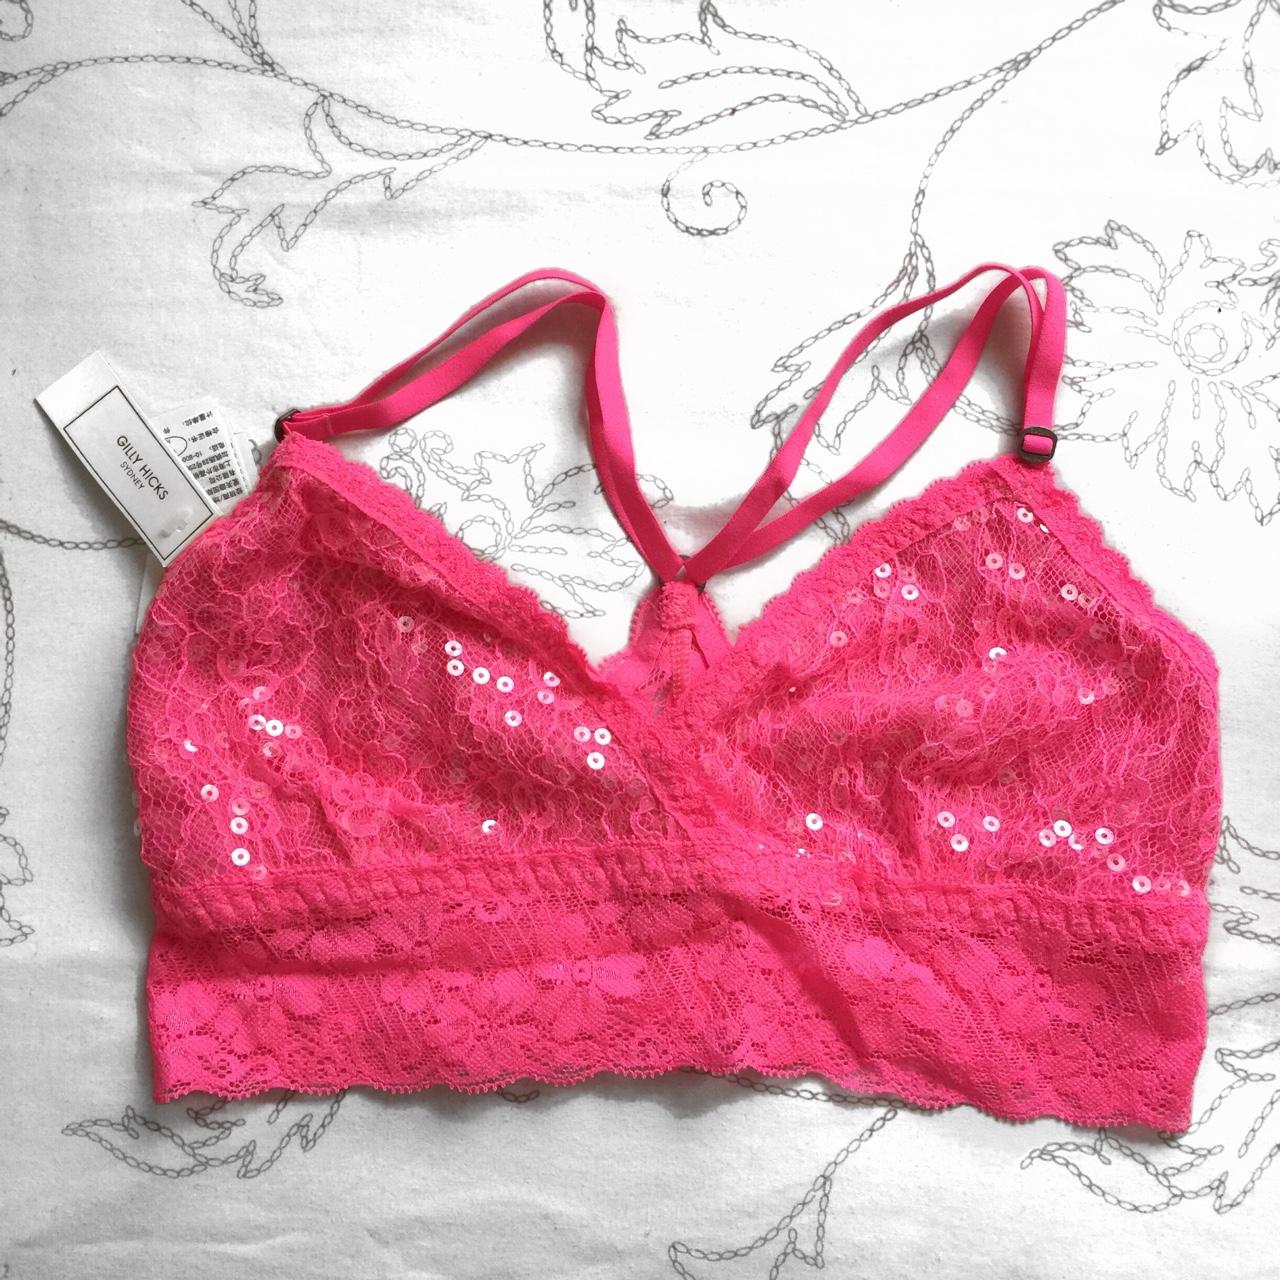 NEW W/ TAGS Gilly hicks pink sparkly bralette sports - Depop